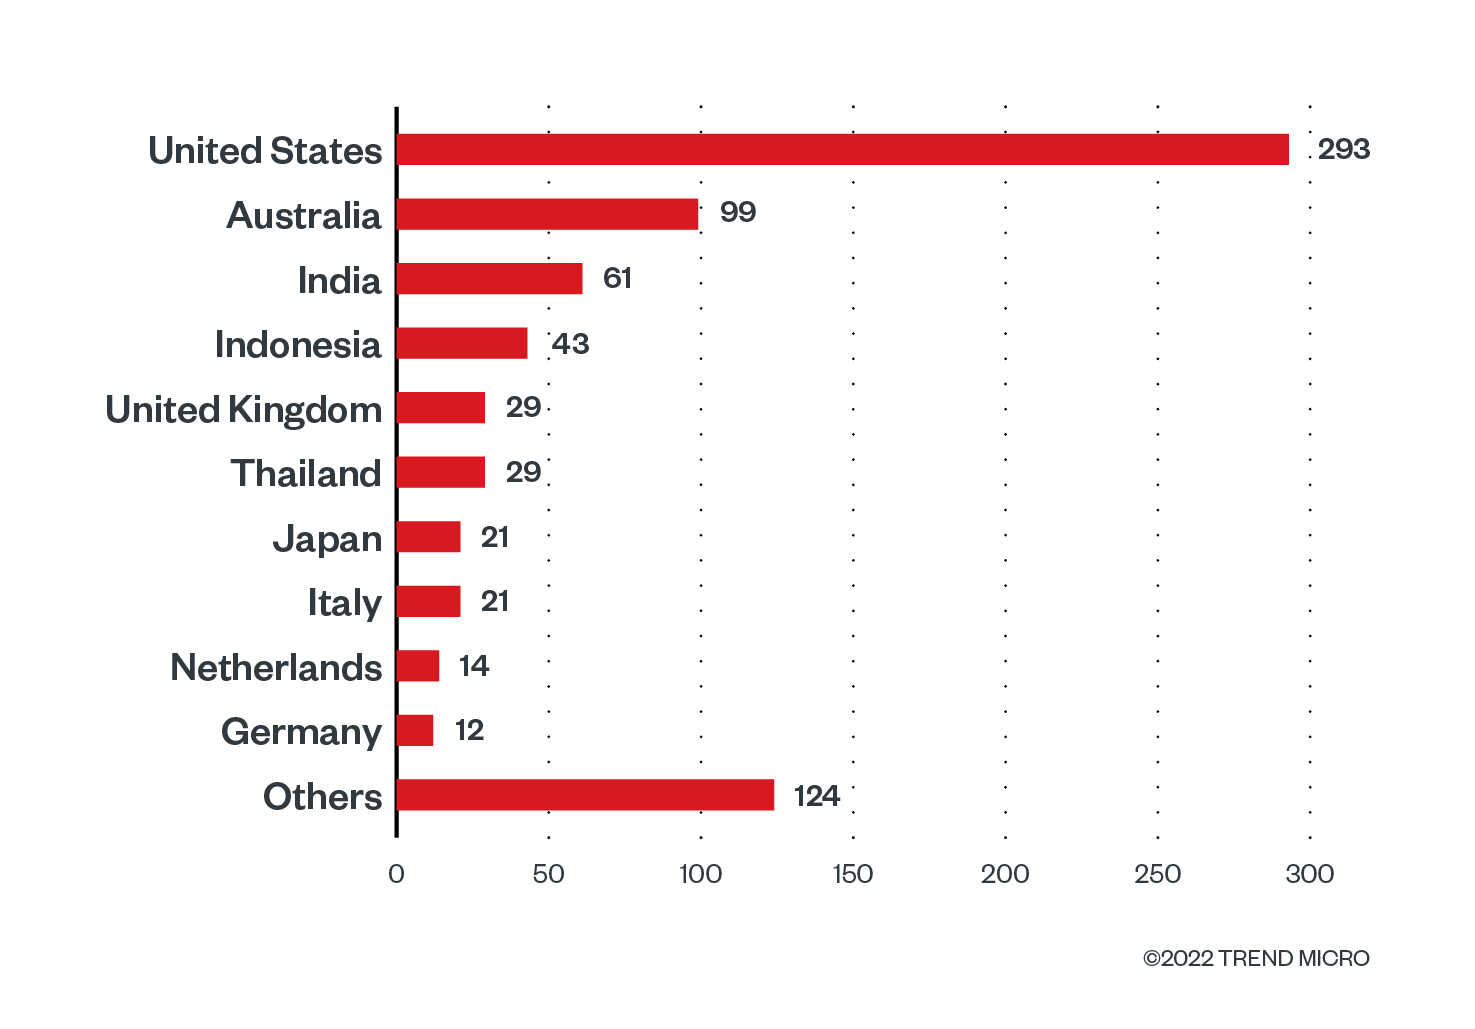 10 countries with the highest number of attack attempts in terms of infected machines for the BlackCat ransomware (November 1, 2021 to September 30, 2022)